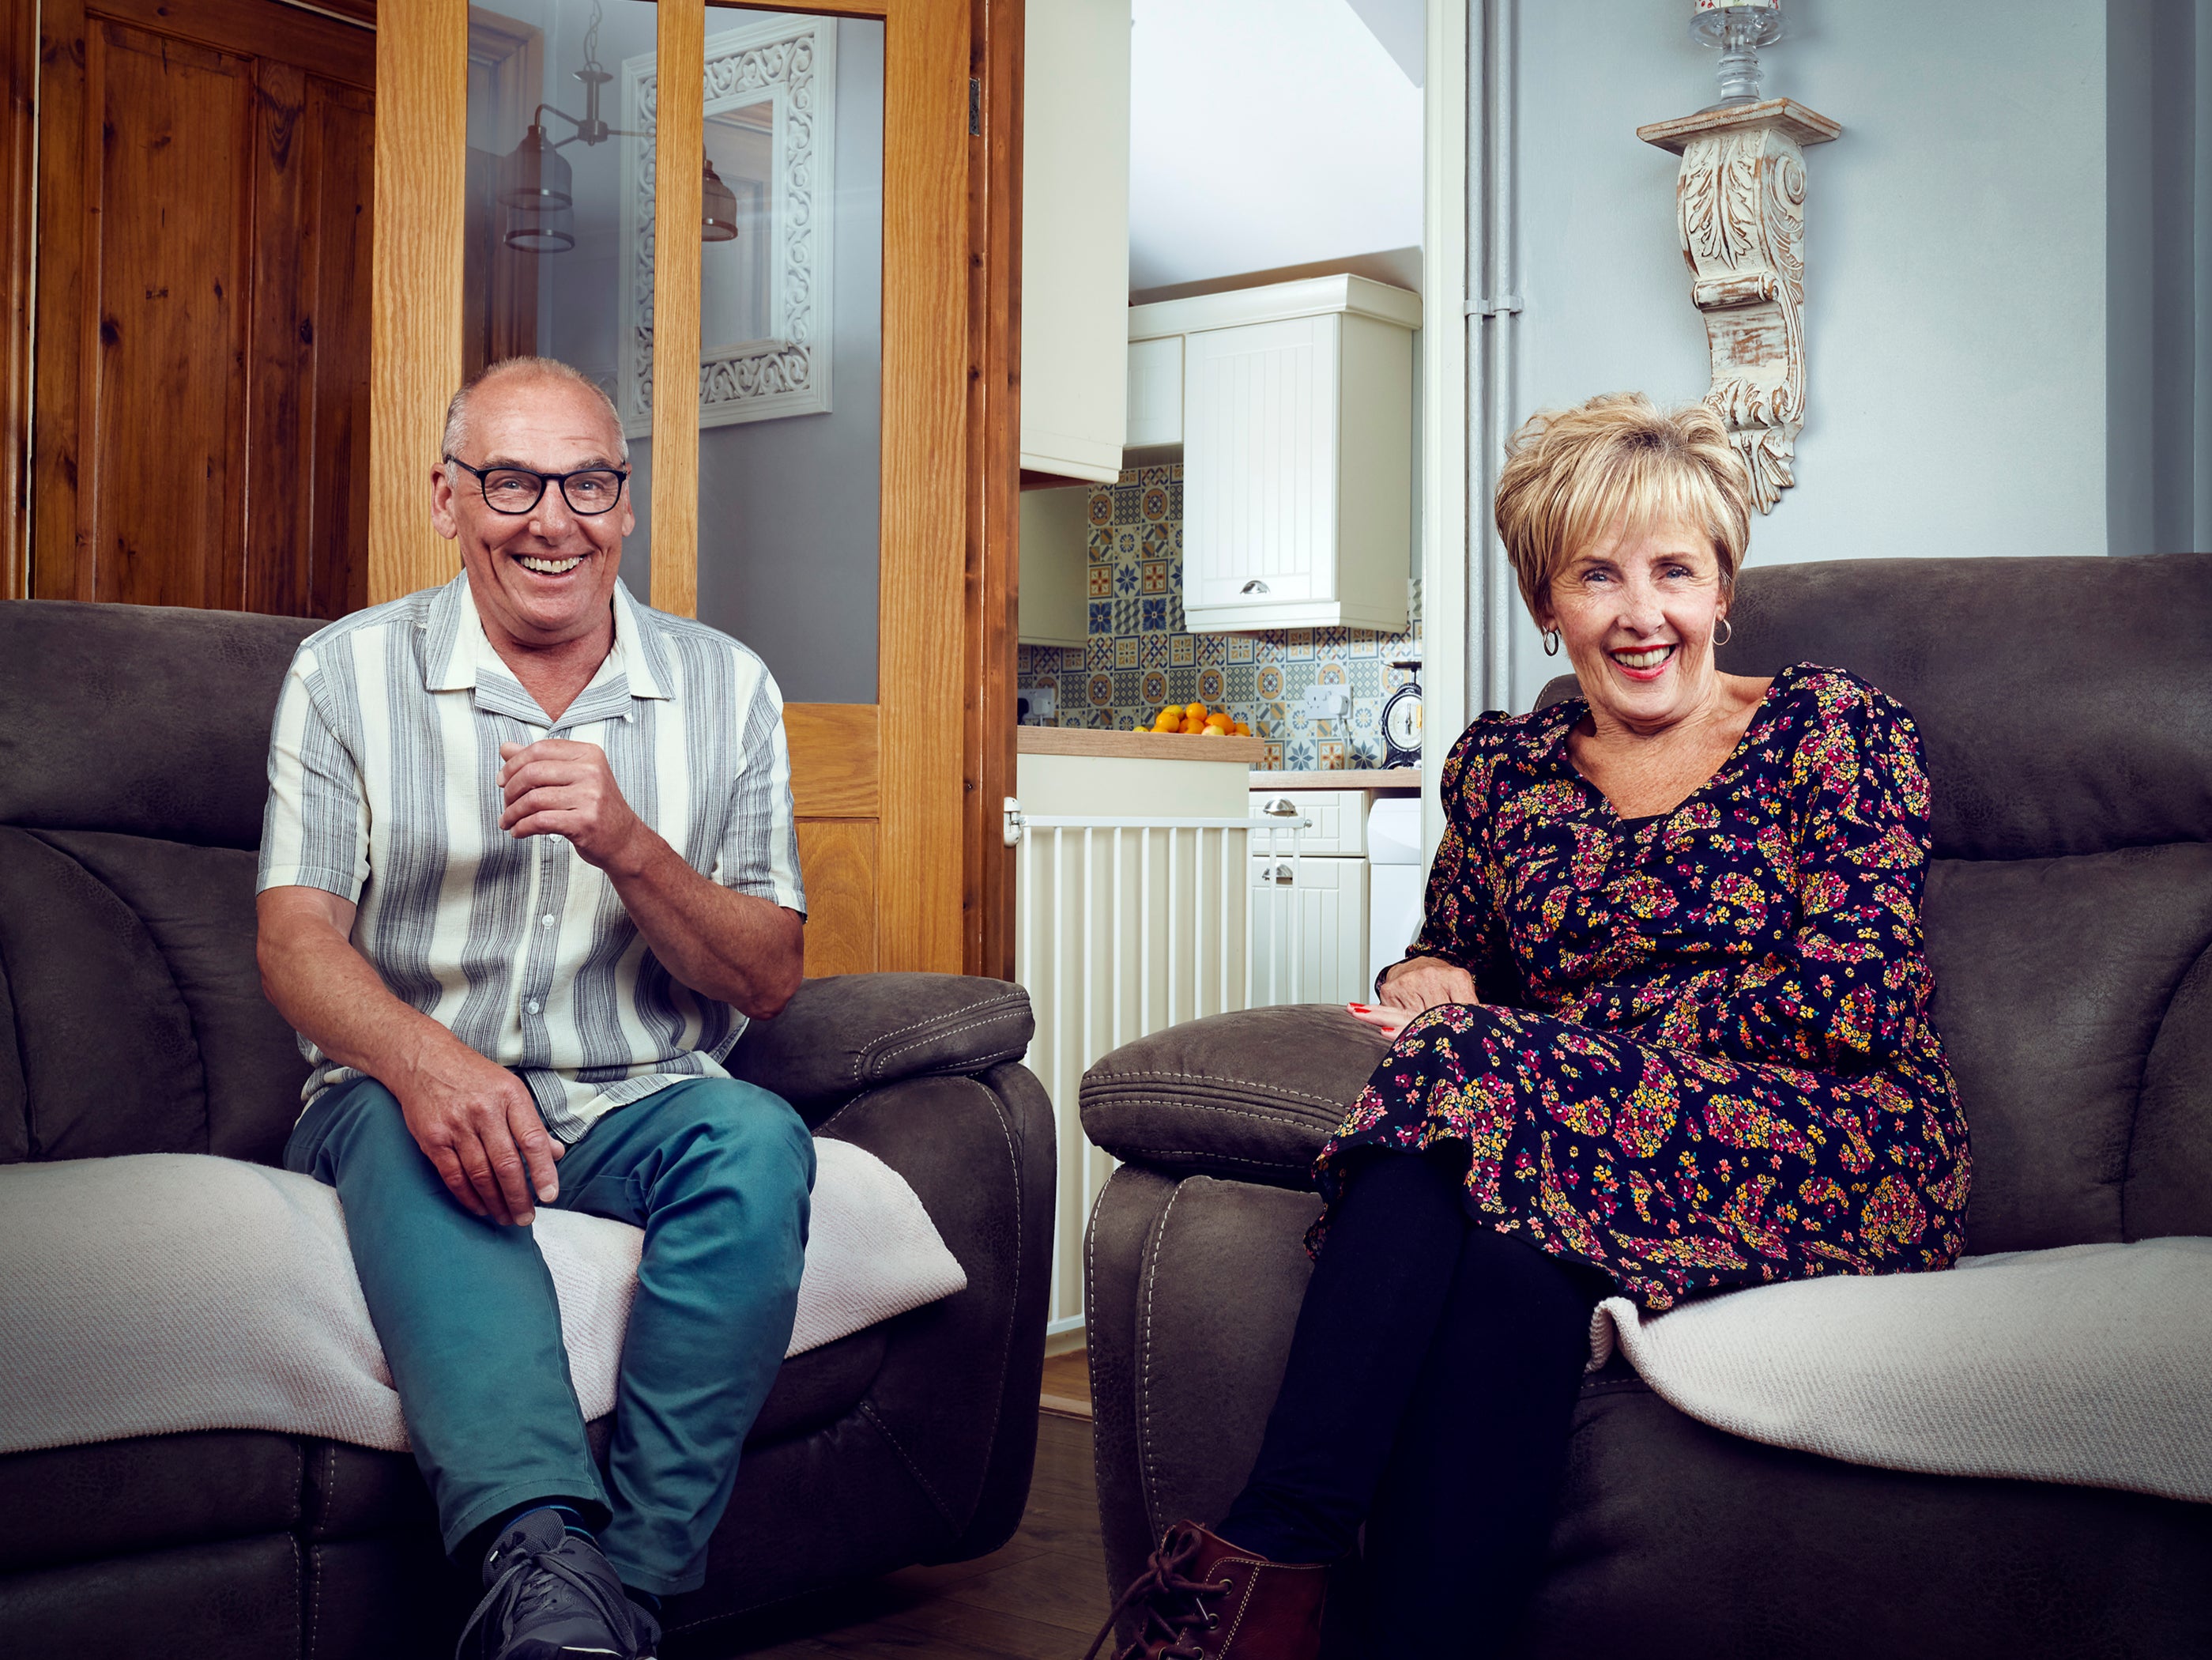 ‘Gogglebox’ follows regular people as they react to the week’s TV